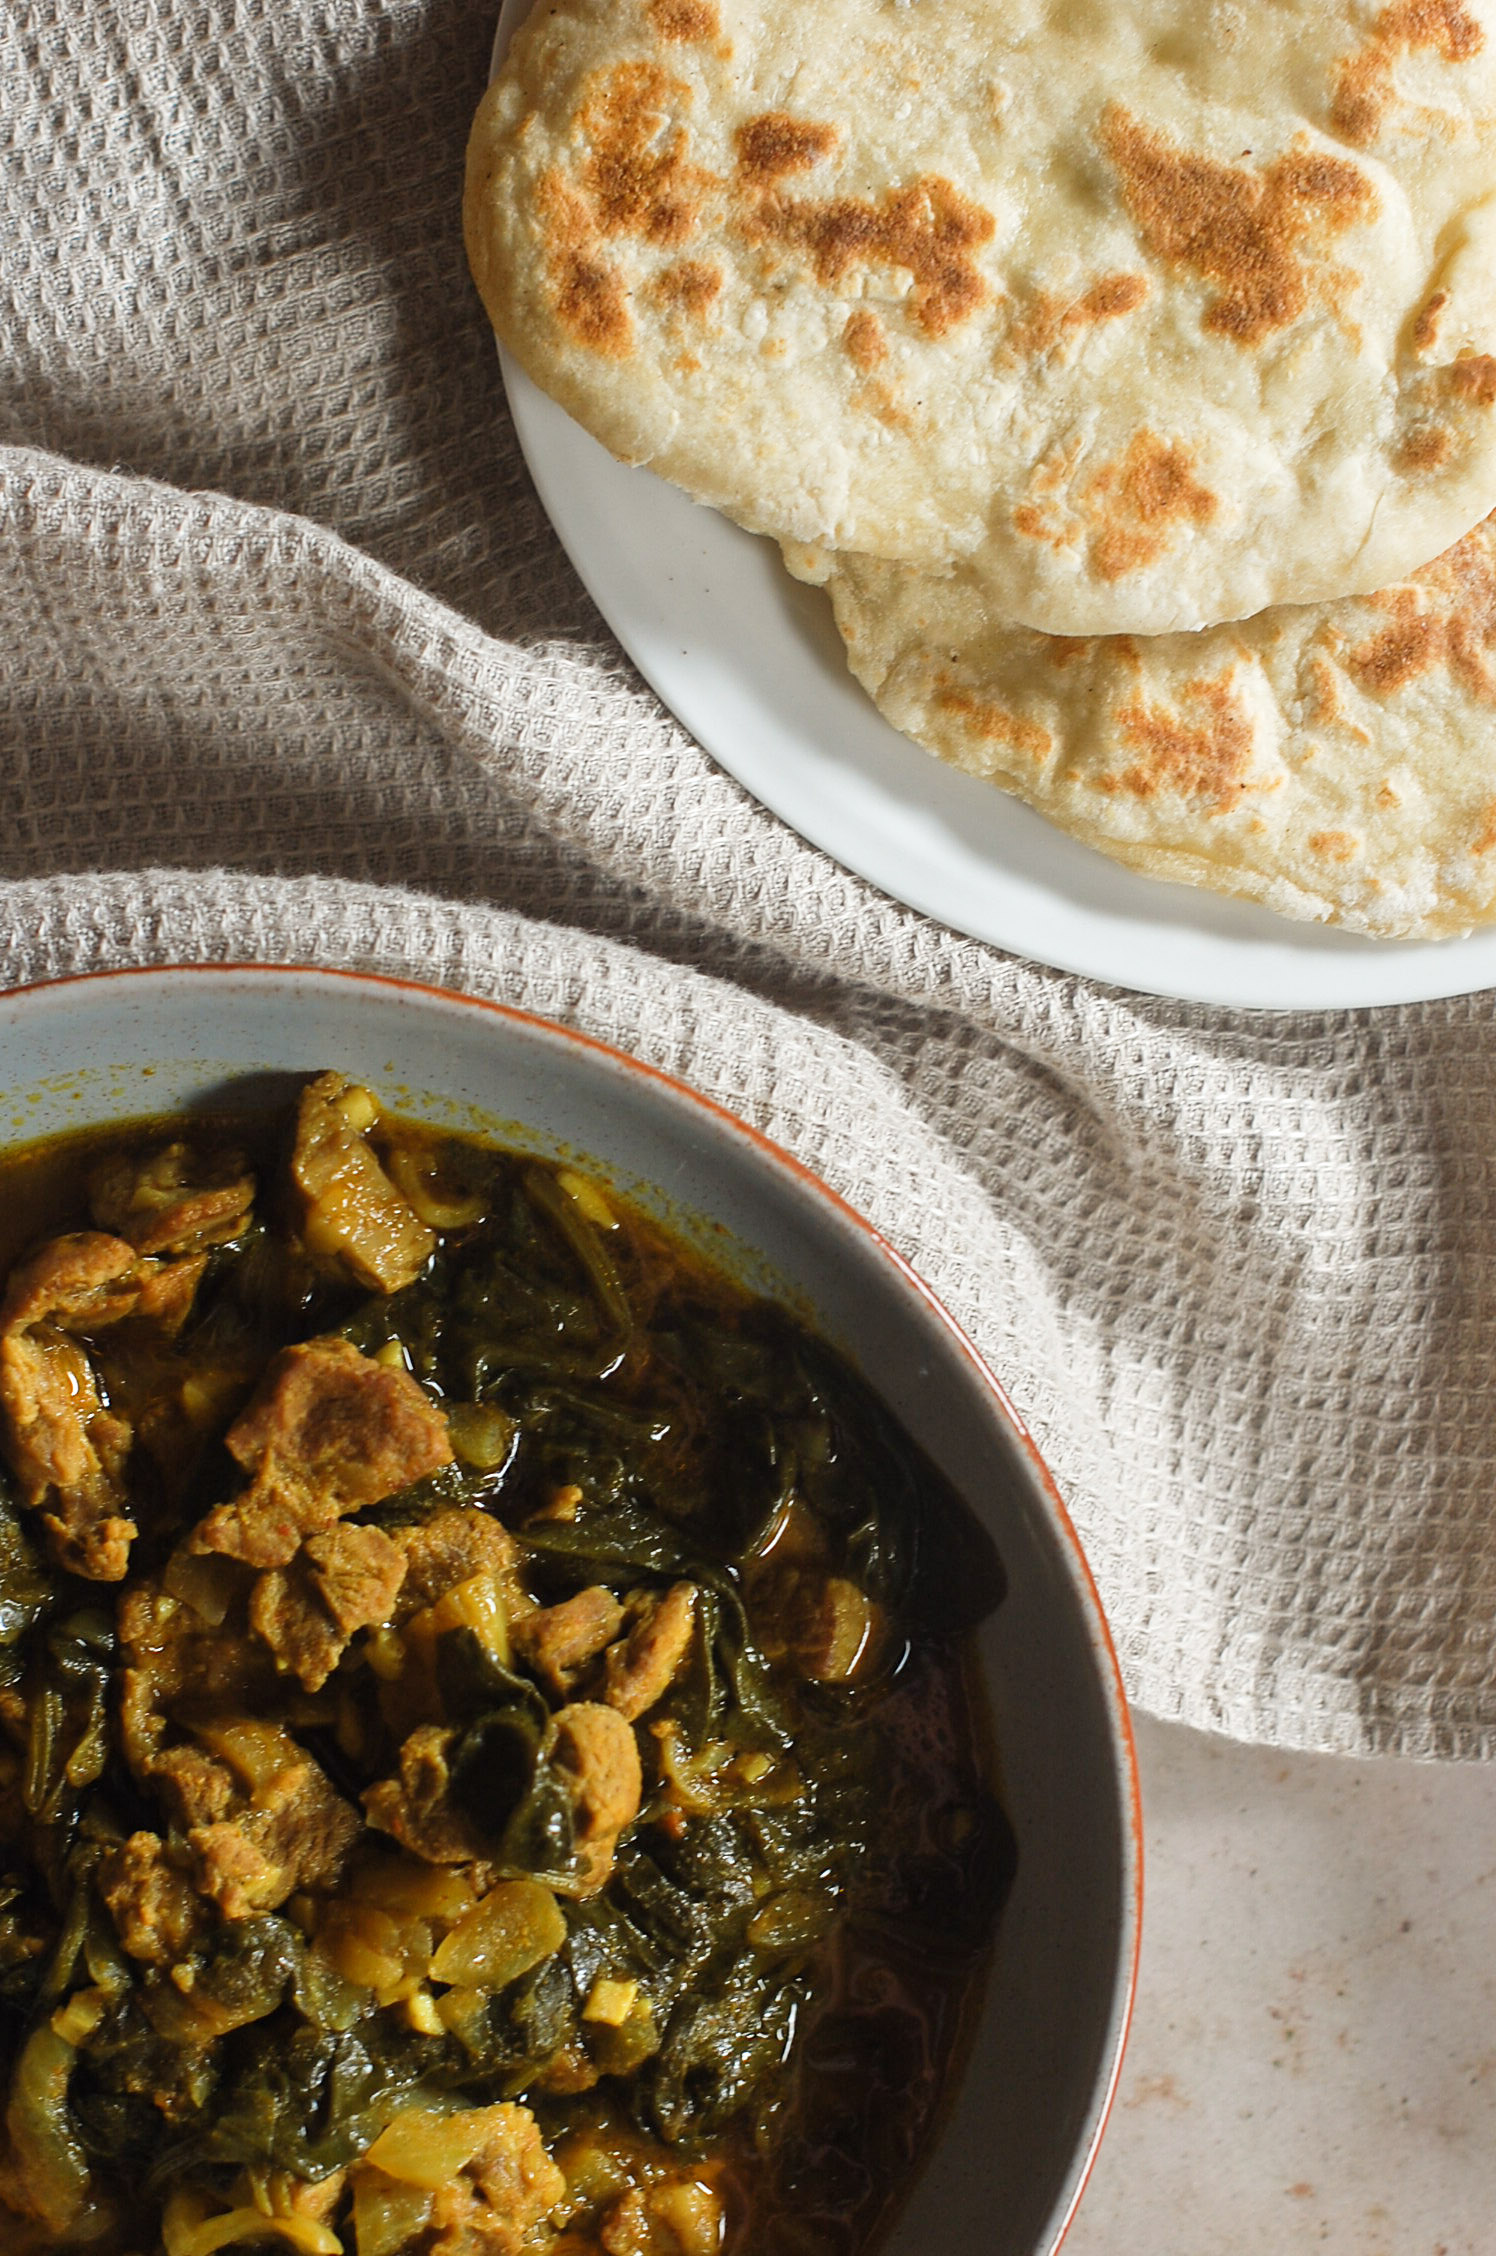 Lamb and spinach curry with naan bread